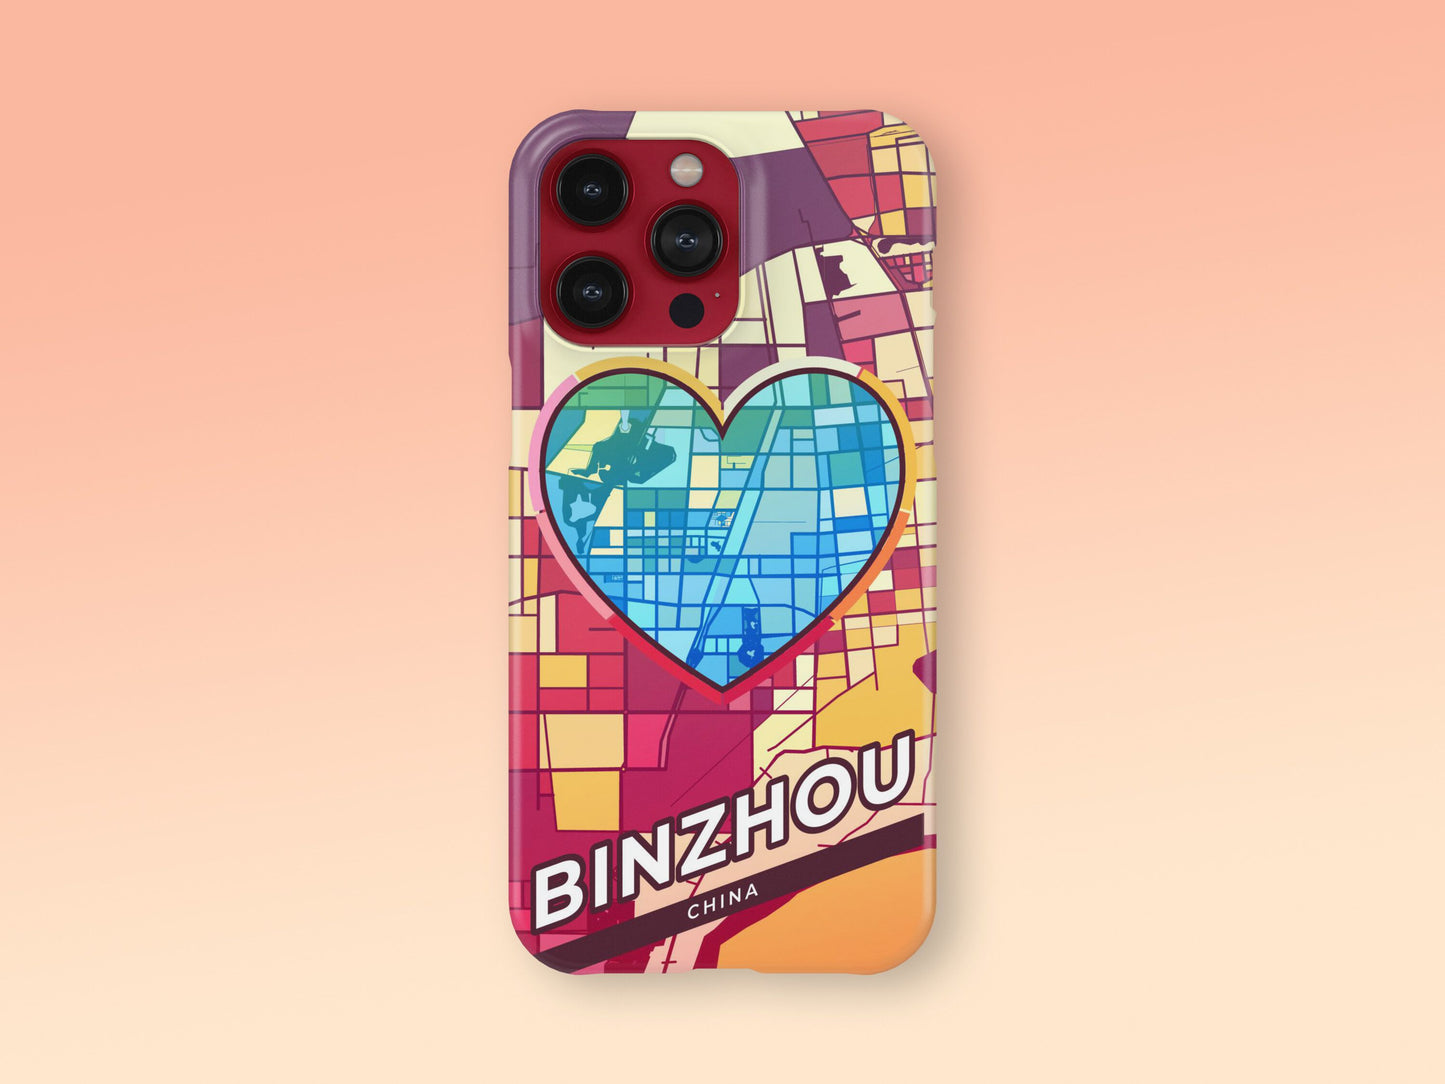 Binzhou China slim phone case with colorful icon. Birthday, wedding or housewarming gift. Couple match cases. 2